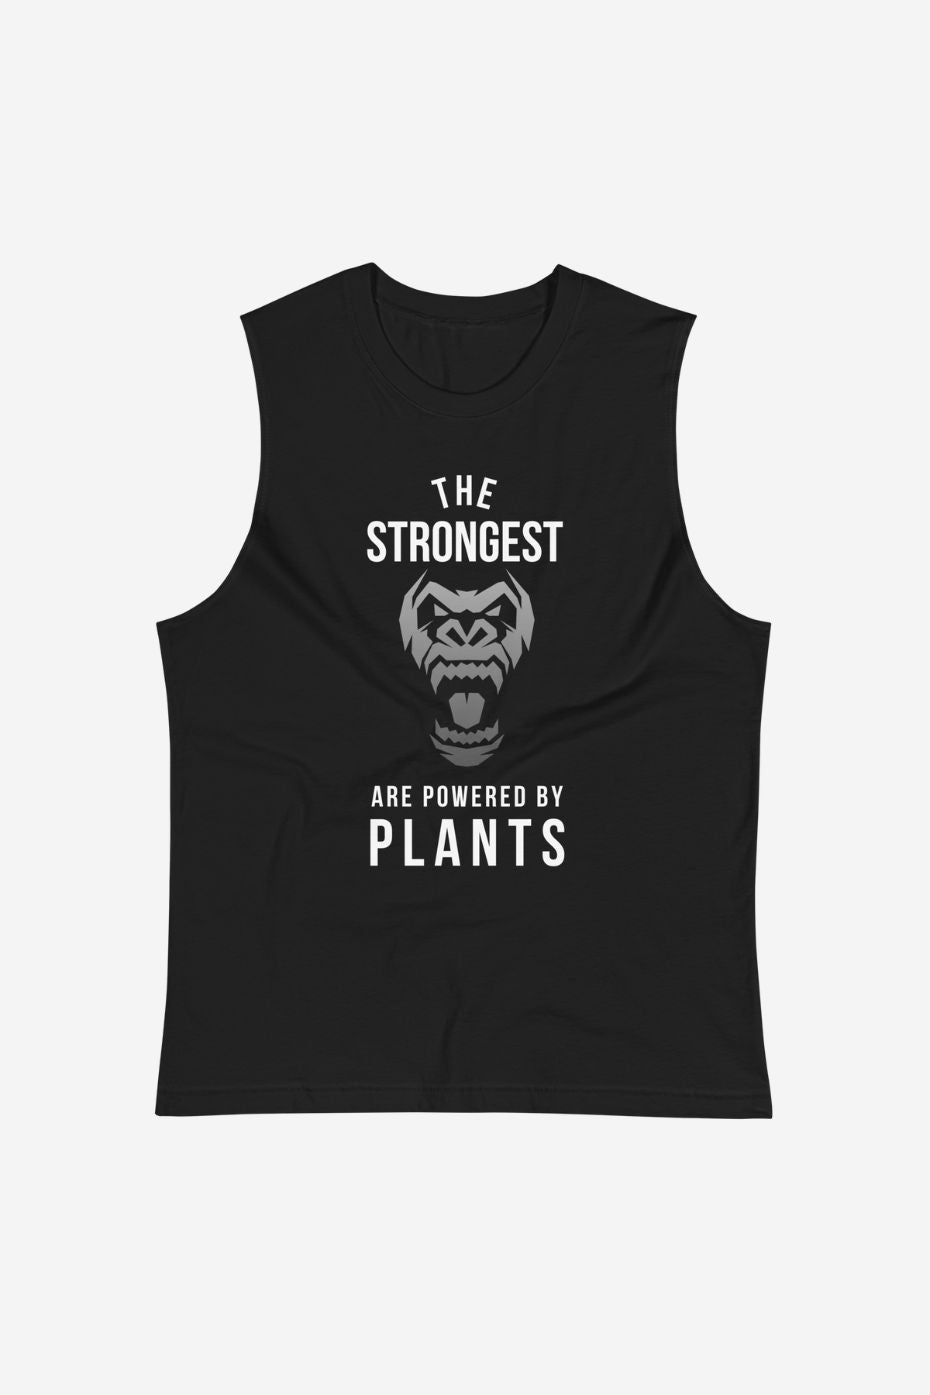 The Strongest - Unisex Muscle Shirt